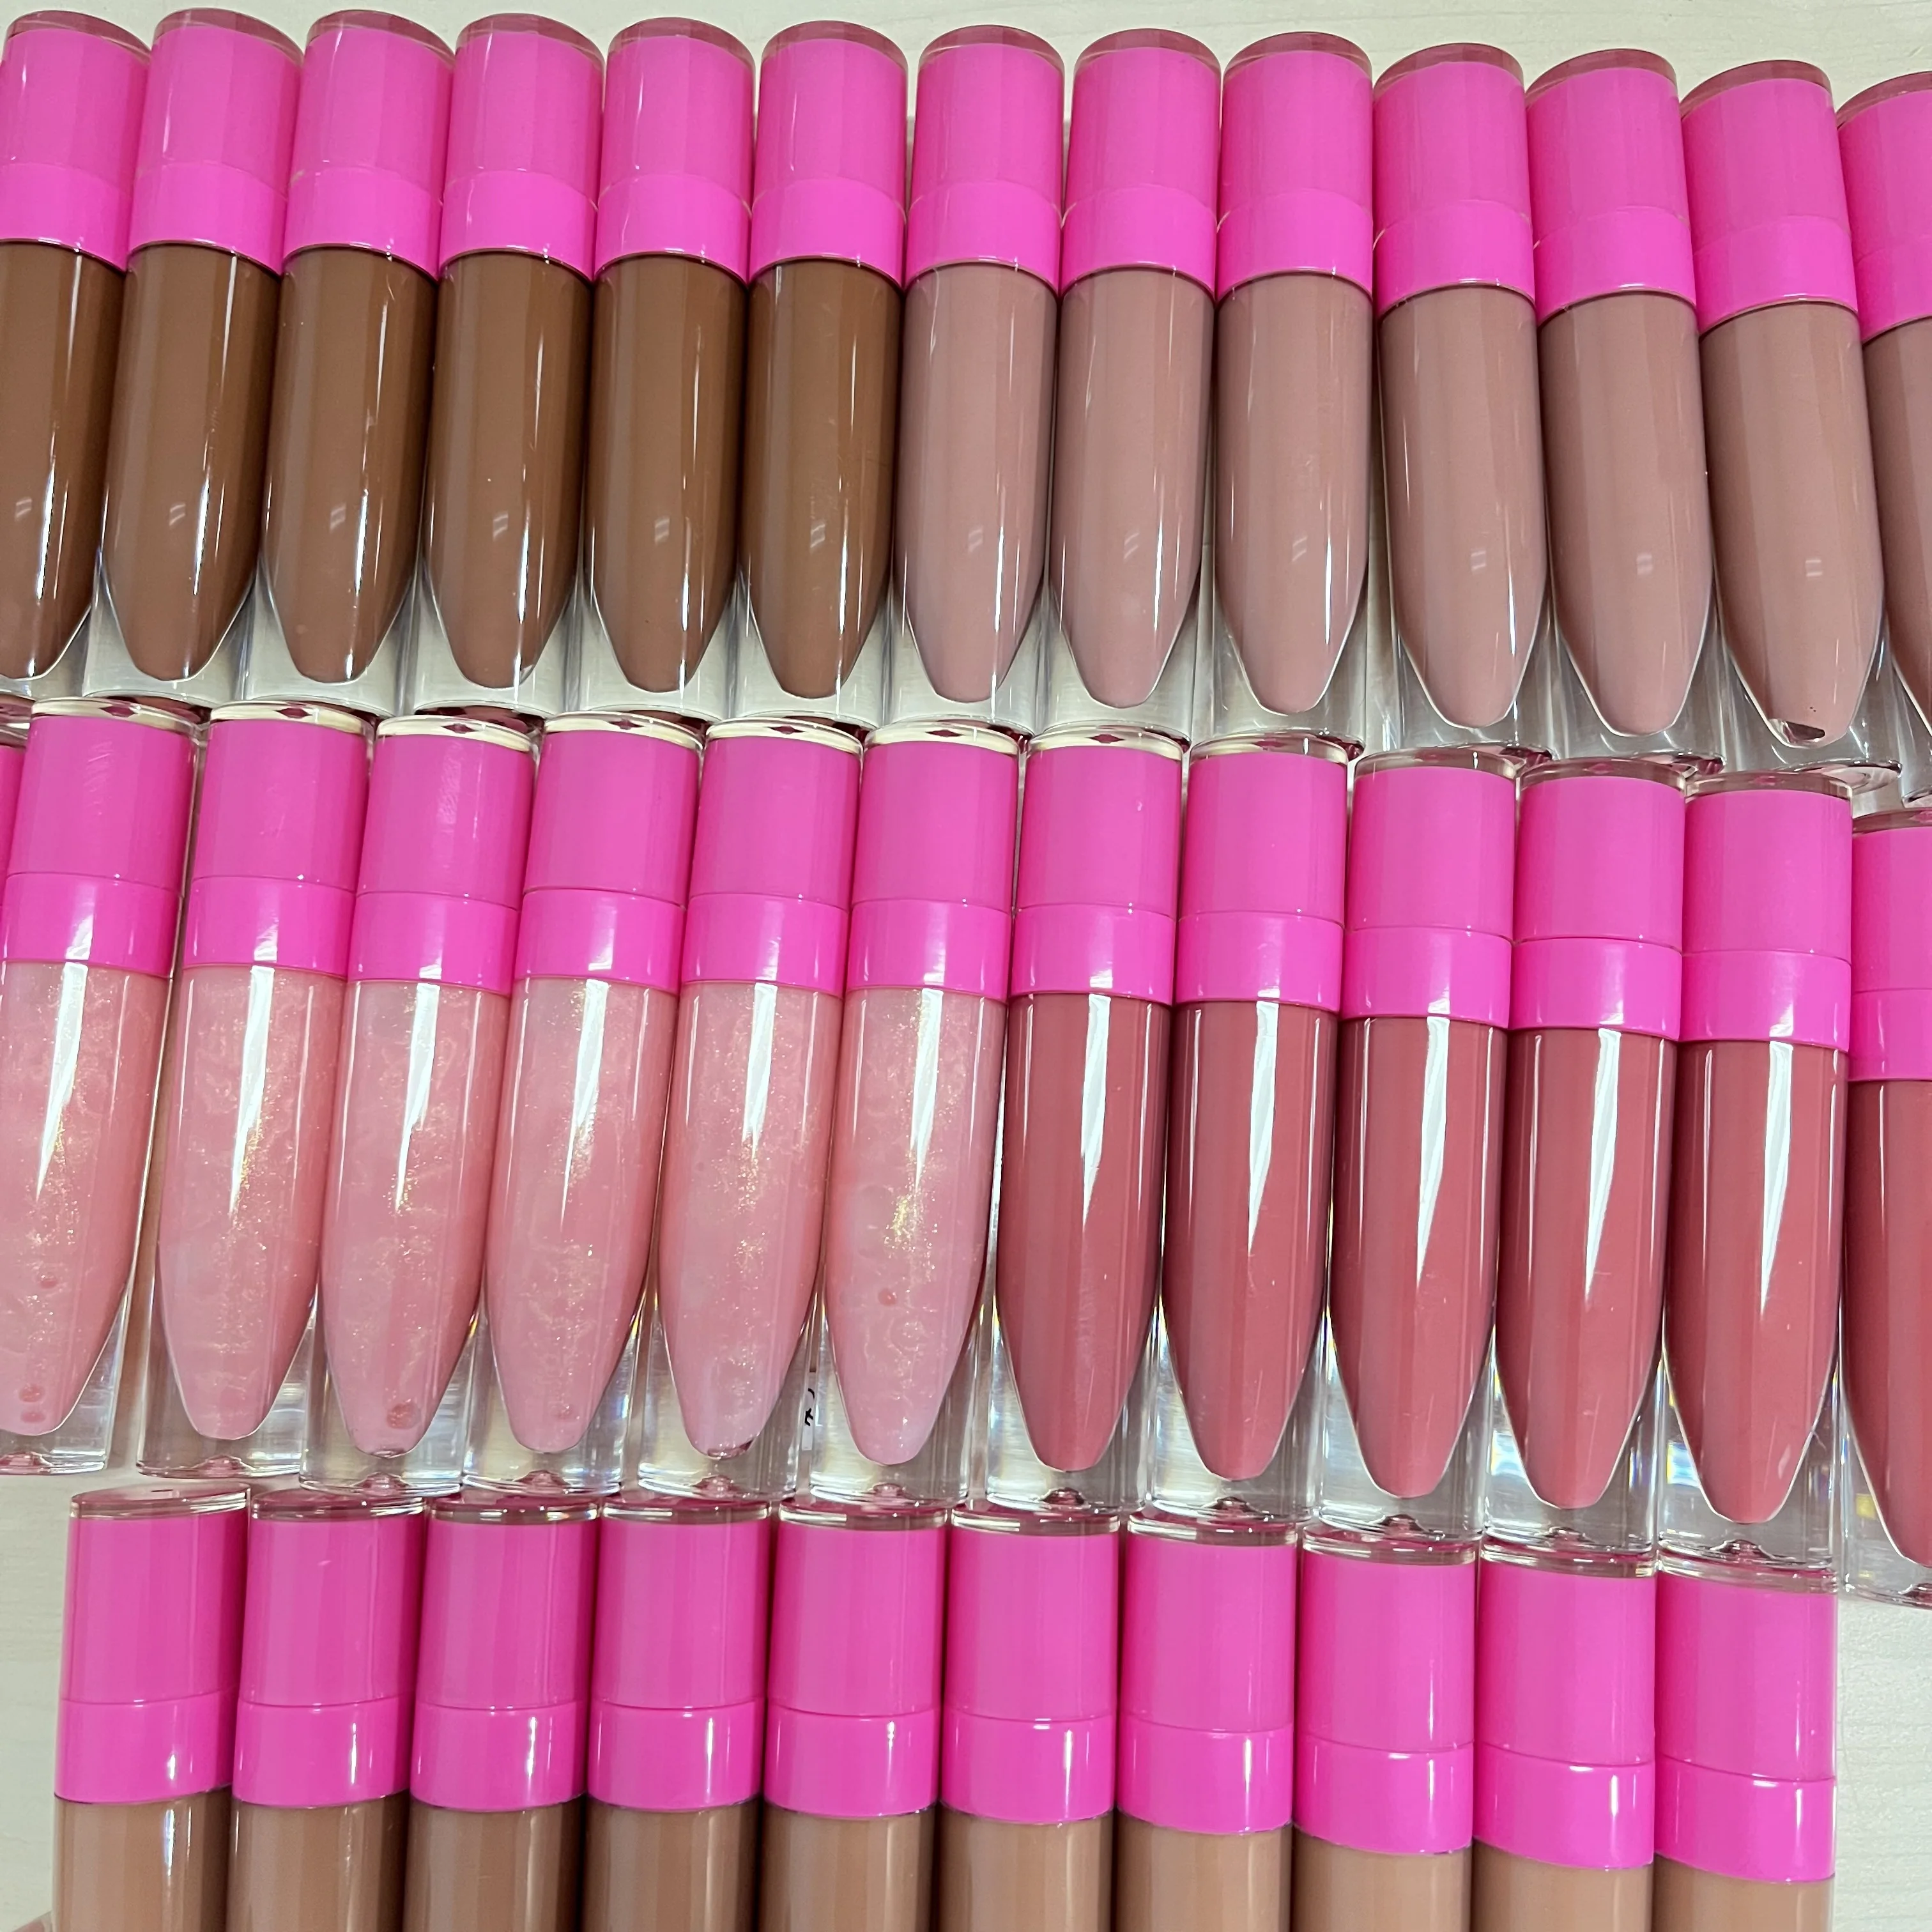 

Lip gloss vendor wholesale hot pink tubes glossy nude lipgloss private label